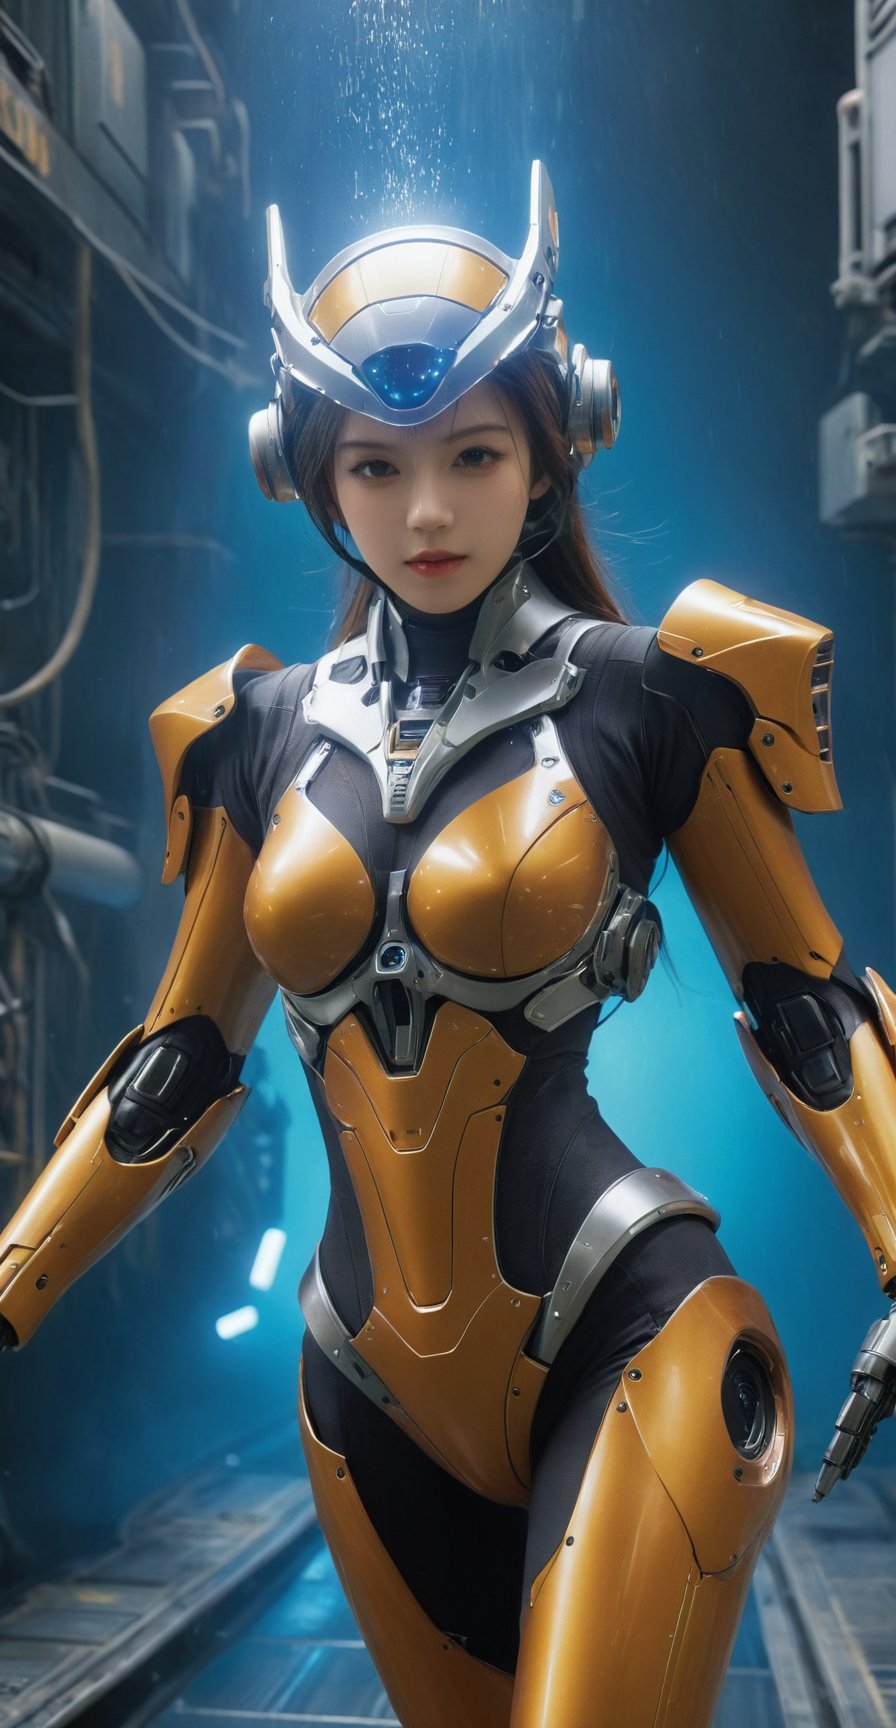 (ultra realistic,best quality),photorealistic,Extremely Realistic, in depth, cinematic light,mecha\(hubggirl)\,

a girl, thunder Orange, tight suit,Space helmet of the 1990s,and the anime series ace, Fantastic Surrealism, Post-apocalyptic, Cute Illustration, Bio-Robotic Art, Fantasy Digital Painting, alien planet Landscapes, Space Dragon with a futurastic underwater helm Fantasy, Art, Surrealism, Geomorphologie-Kunst, Fluid Art, Underwater Photography, Biomechanical Sculpture, Kemono, Beautiful Girl Turned to the Camera, Blue Background, 

particle effects, perfect hands, perfect lighting, vibrant colors, 
intricate details, high detailed skin, 
intricate background, realism, realistic, raw, analog, taken by Canon EOS,SIGMA Art Lens 35mm F1.4,ISO 200 Shutter Speed 2000,Vivid picture,